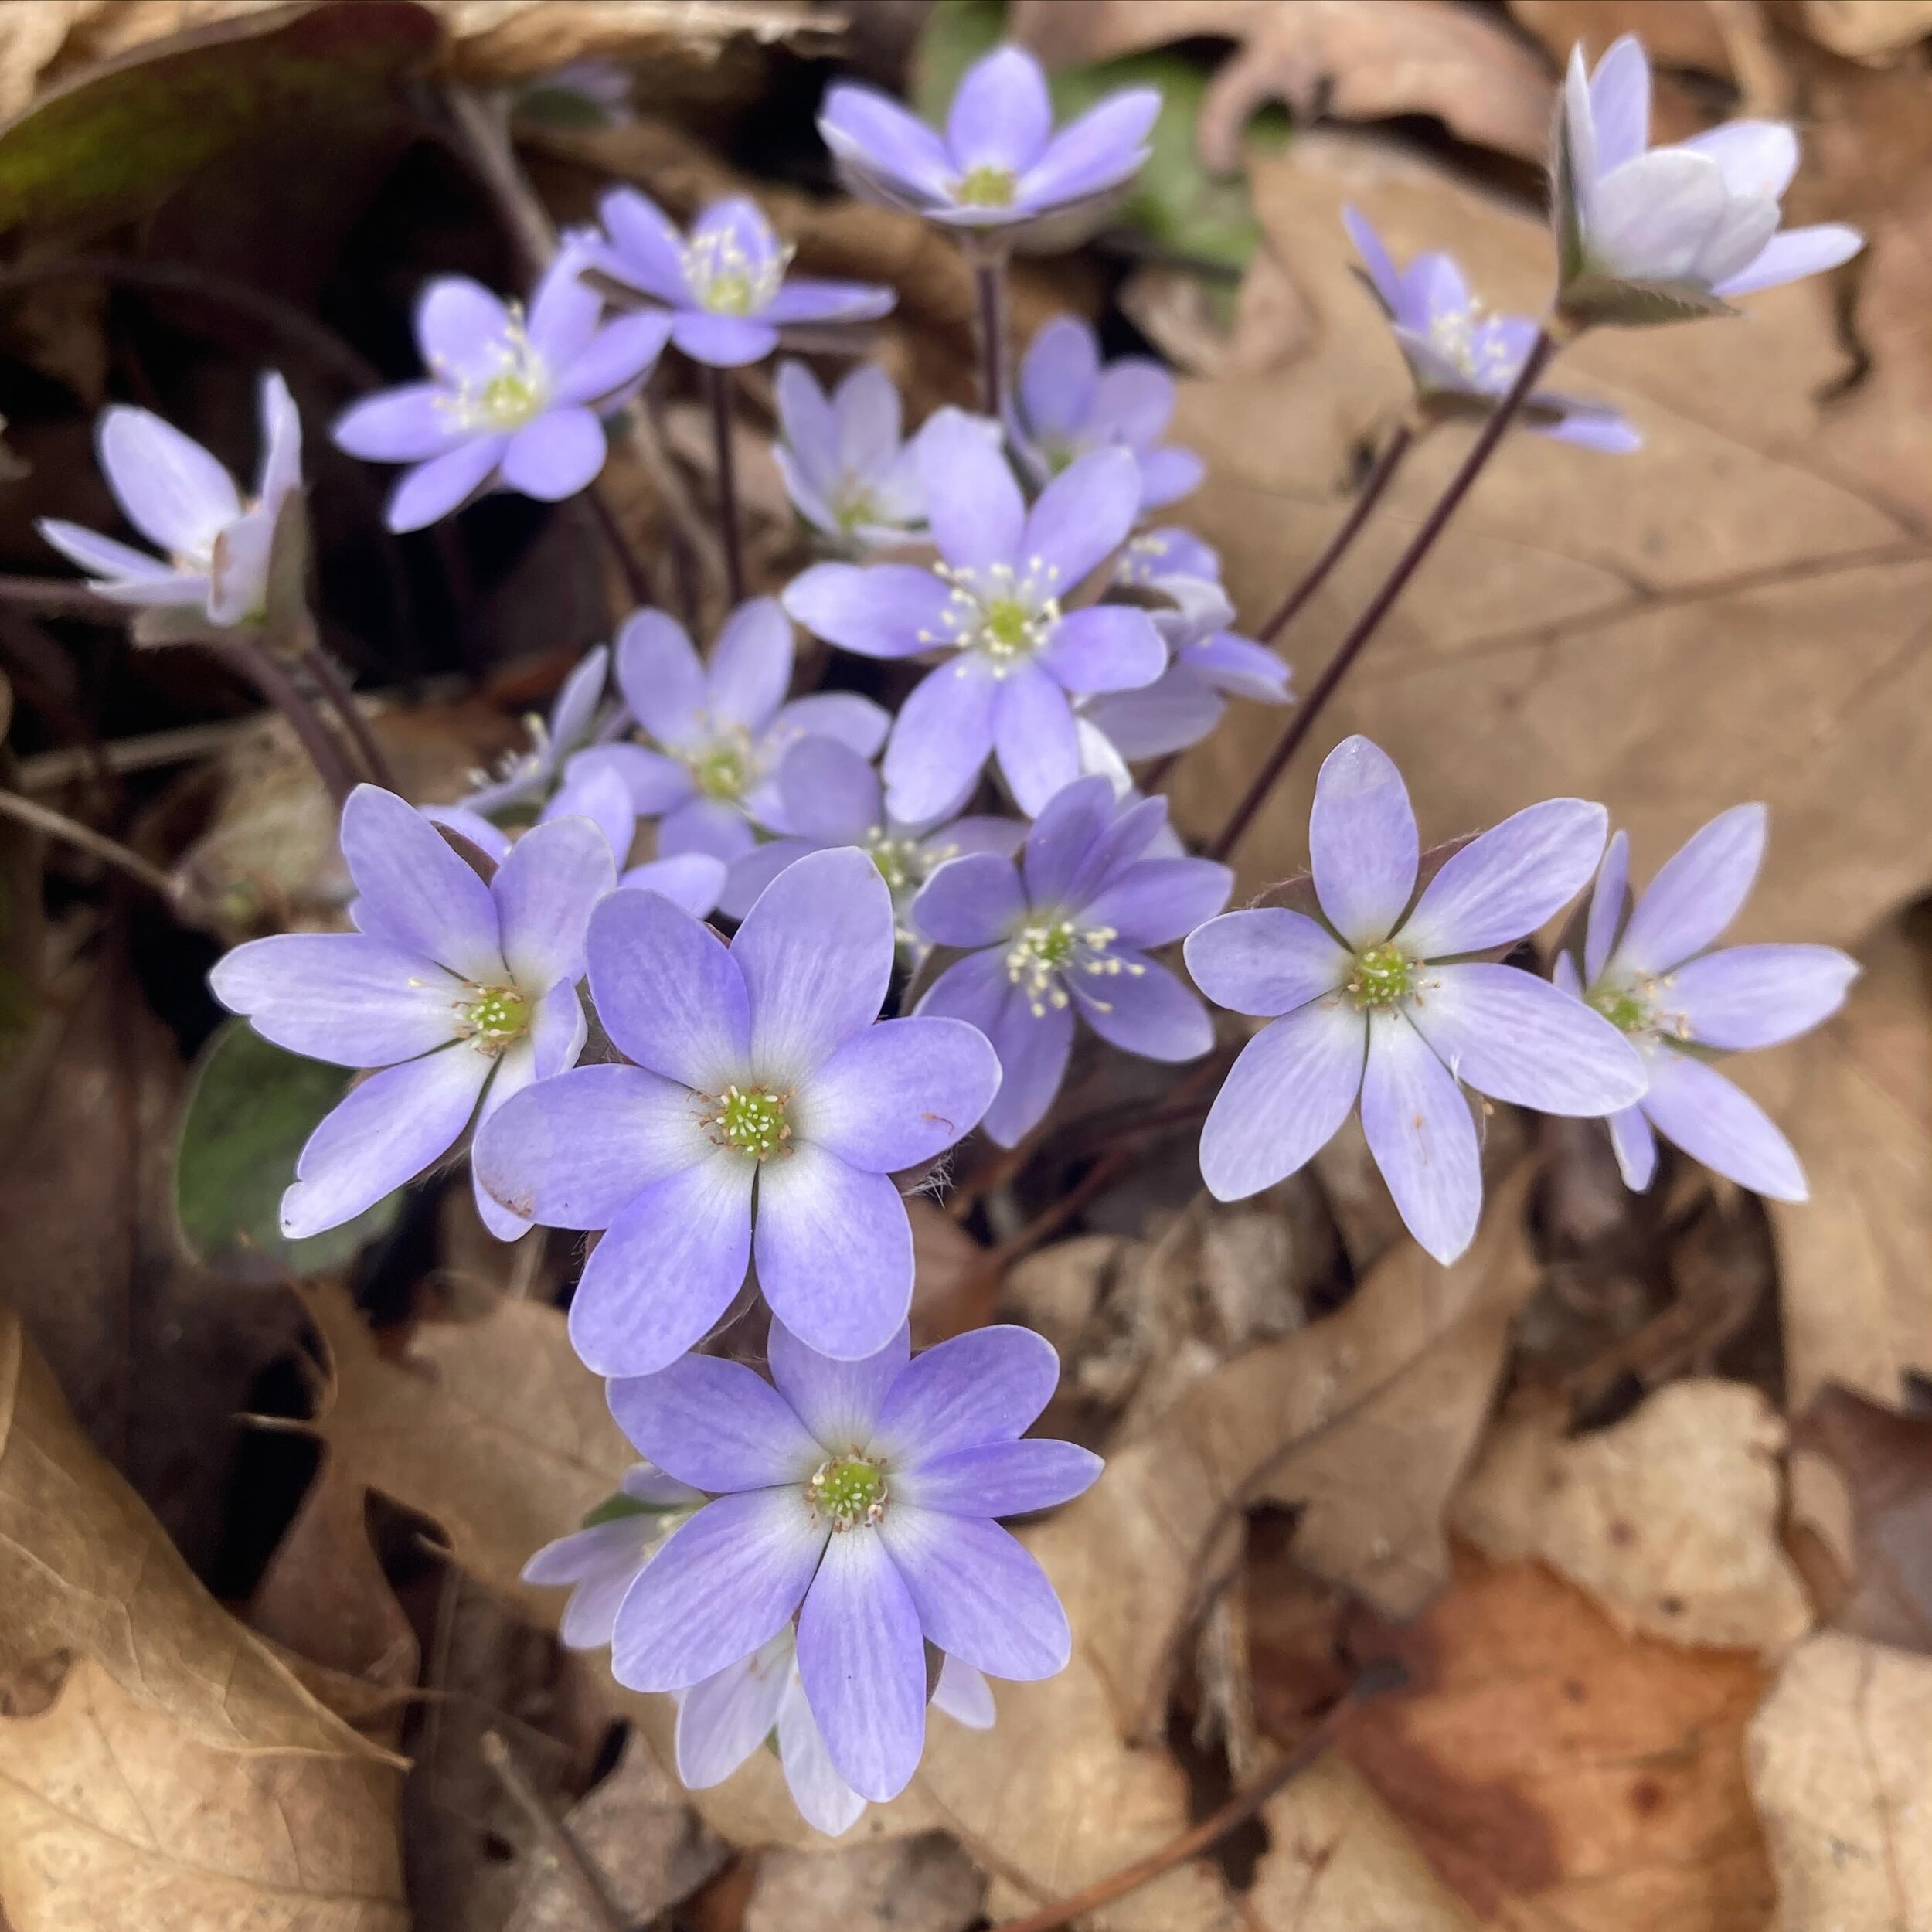 Always love seeing hepaticas out in the wild. Currently in full bloom along the trails at Madeline Bertrand County Park. #hepatica